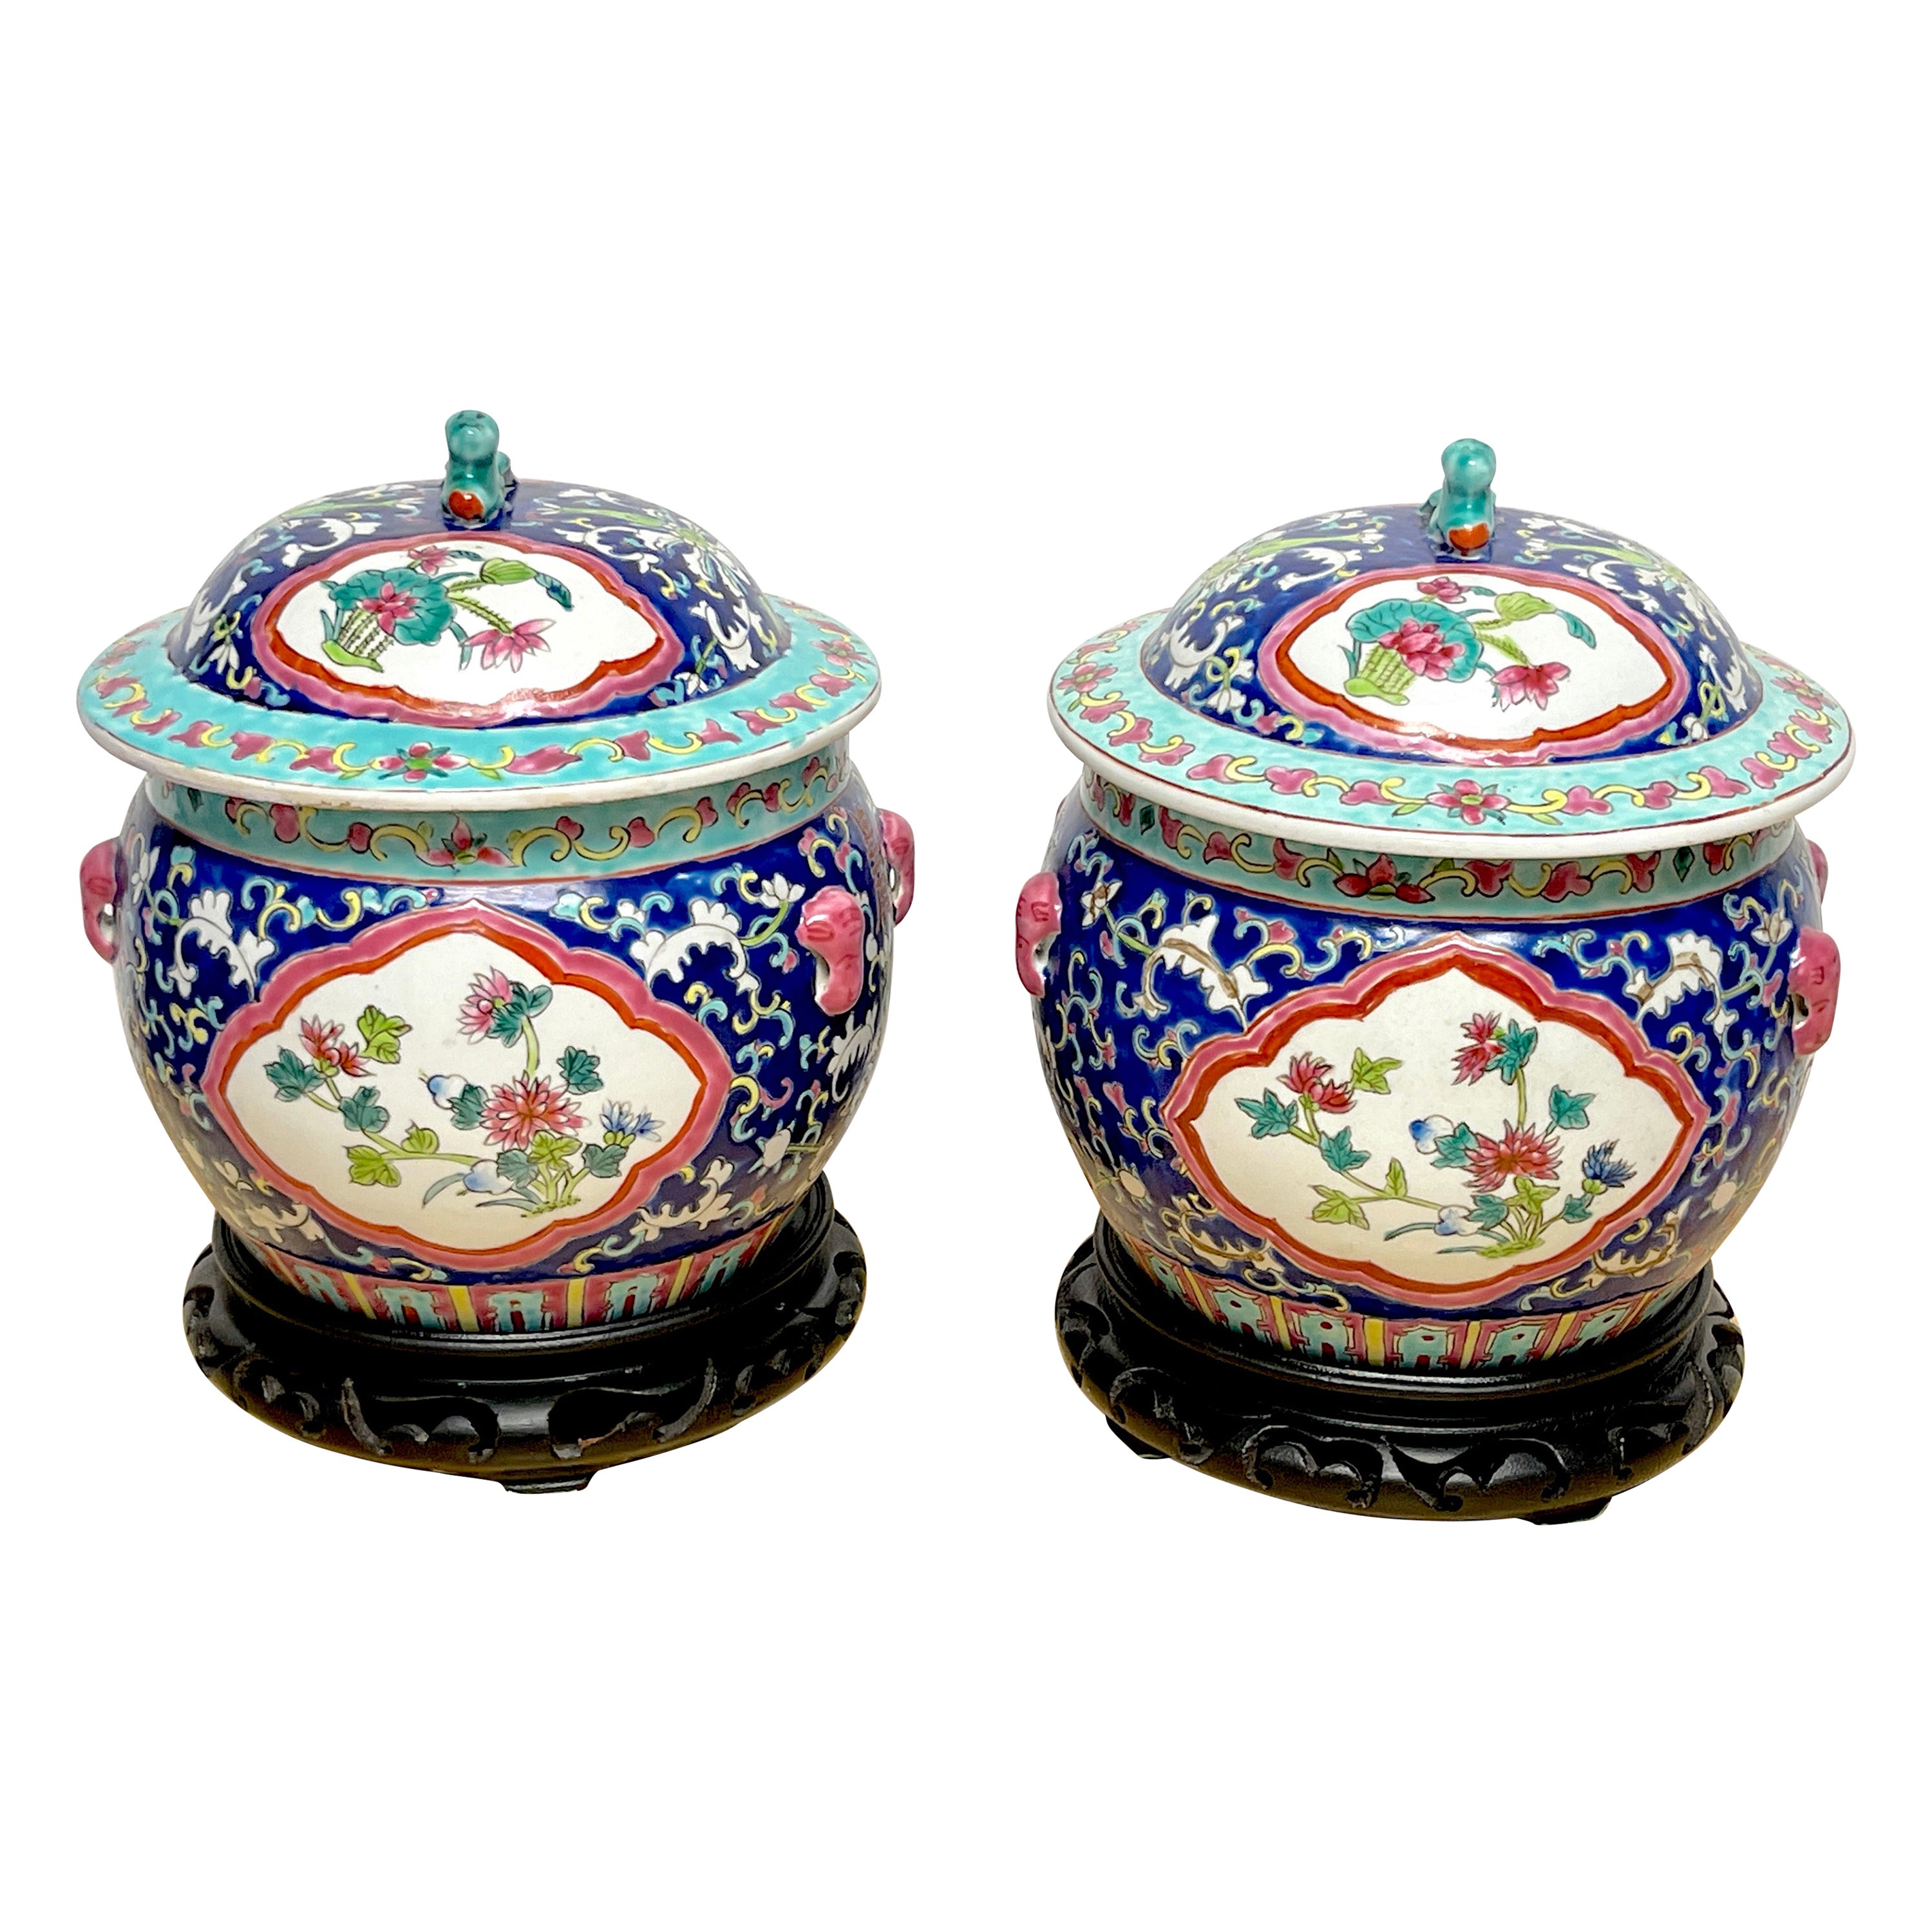 Pair of Chinese Export Famille-Rose Enameled Covered Urns & Stands  For Sale